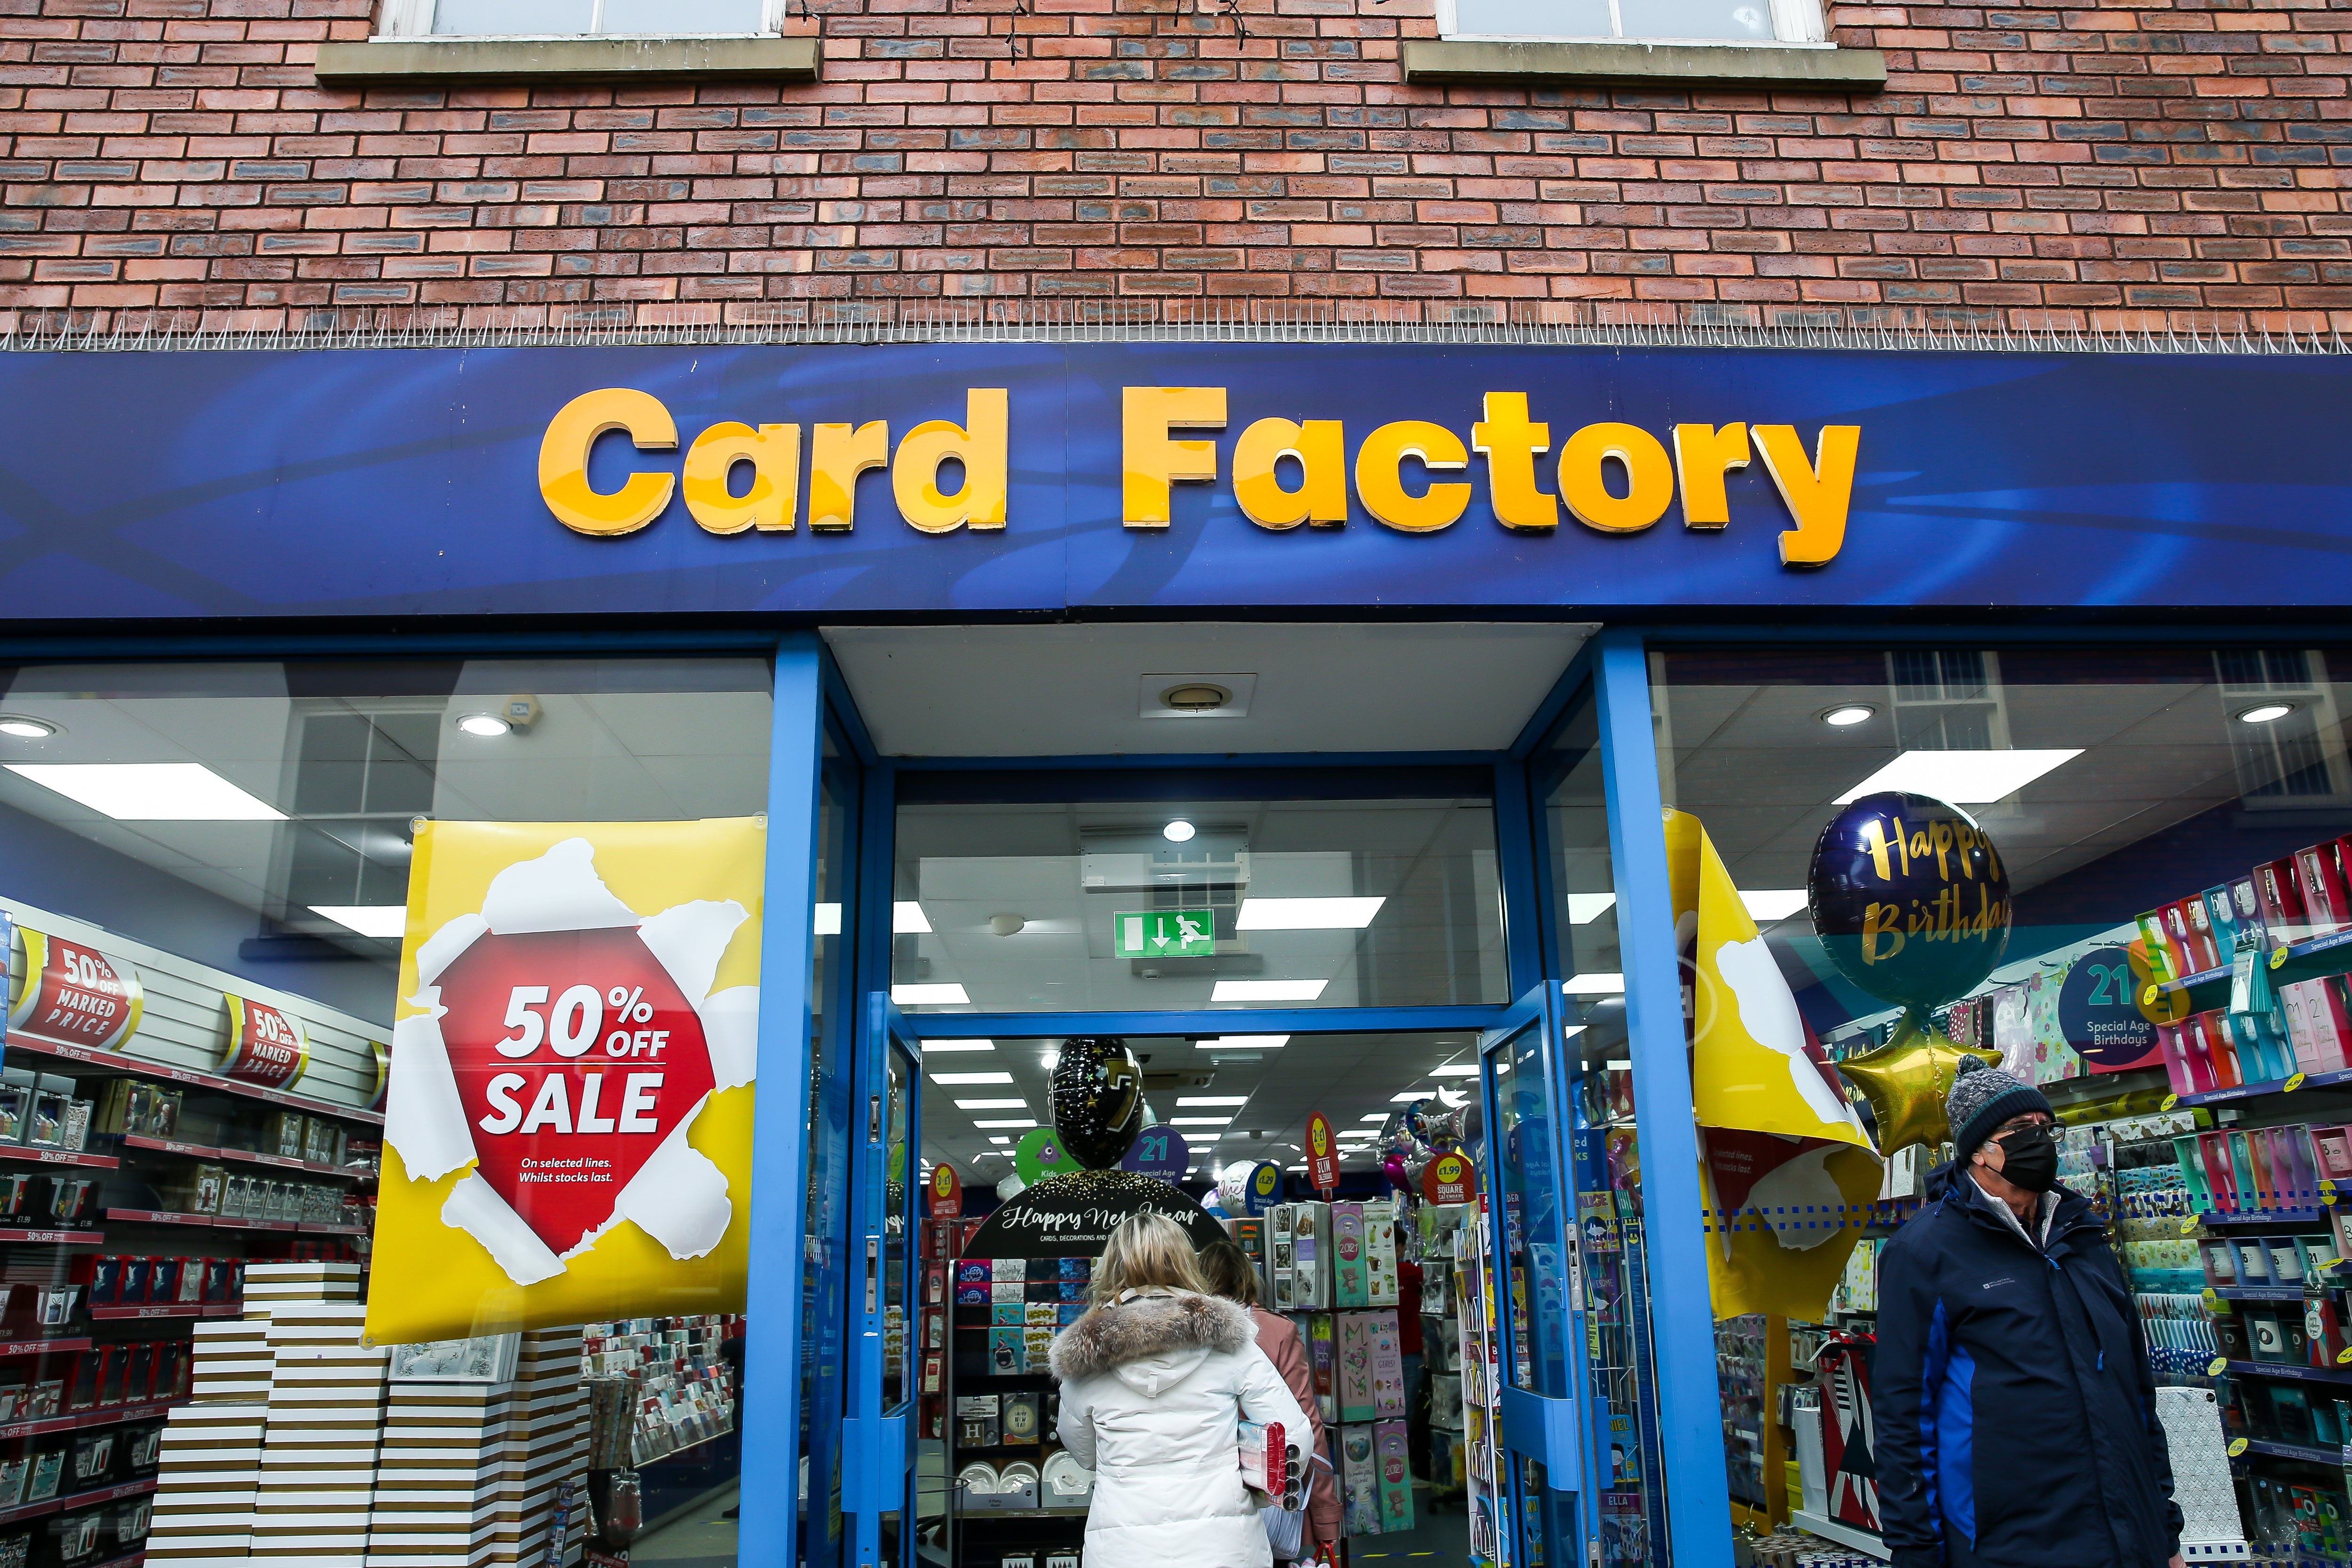 Shoppers entering the Card Factory in Newcastle-under-Lyme (Barrington Commbs/PA)